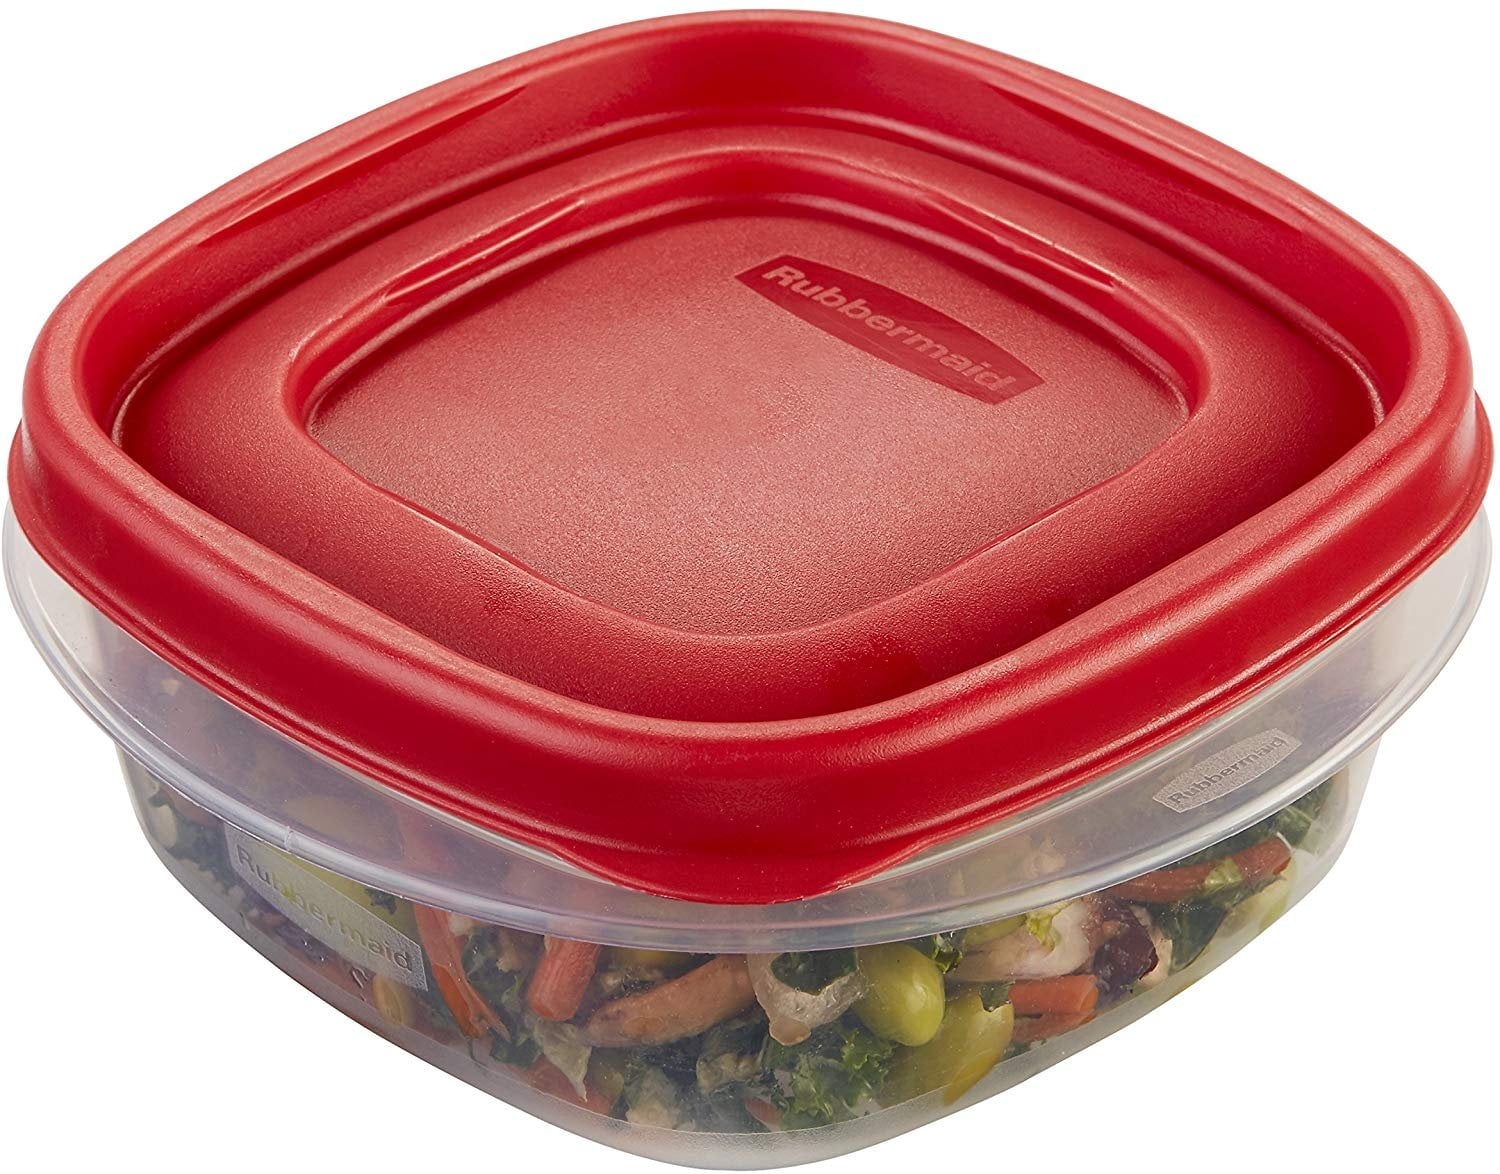 Rubbermaid Specialty Plastic Egg Keeper Food Storage Container , Red